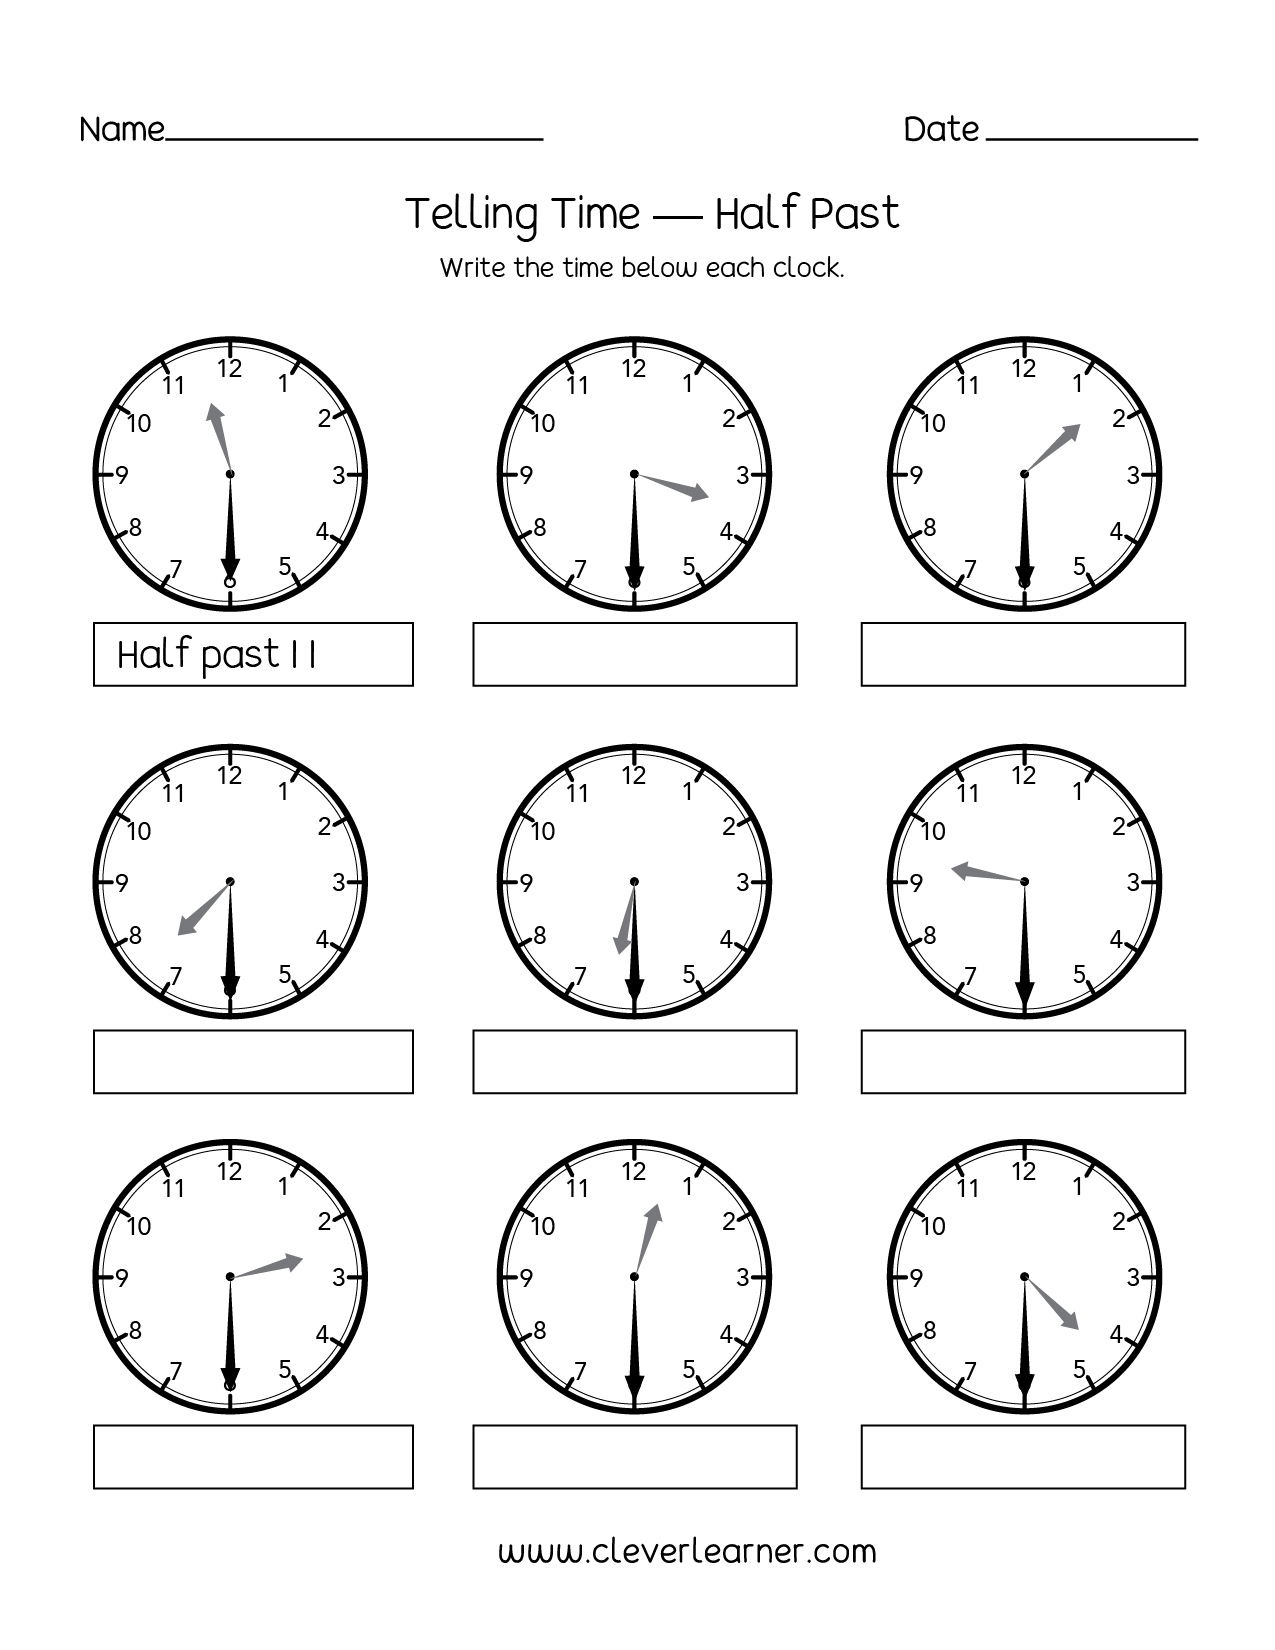 telling-time-half-past-the-hour-worksheets-for-1st-and-2nd-graders